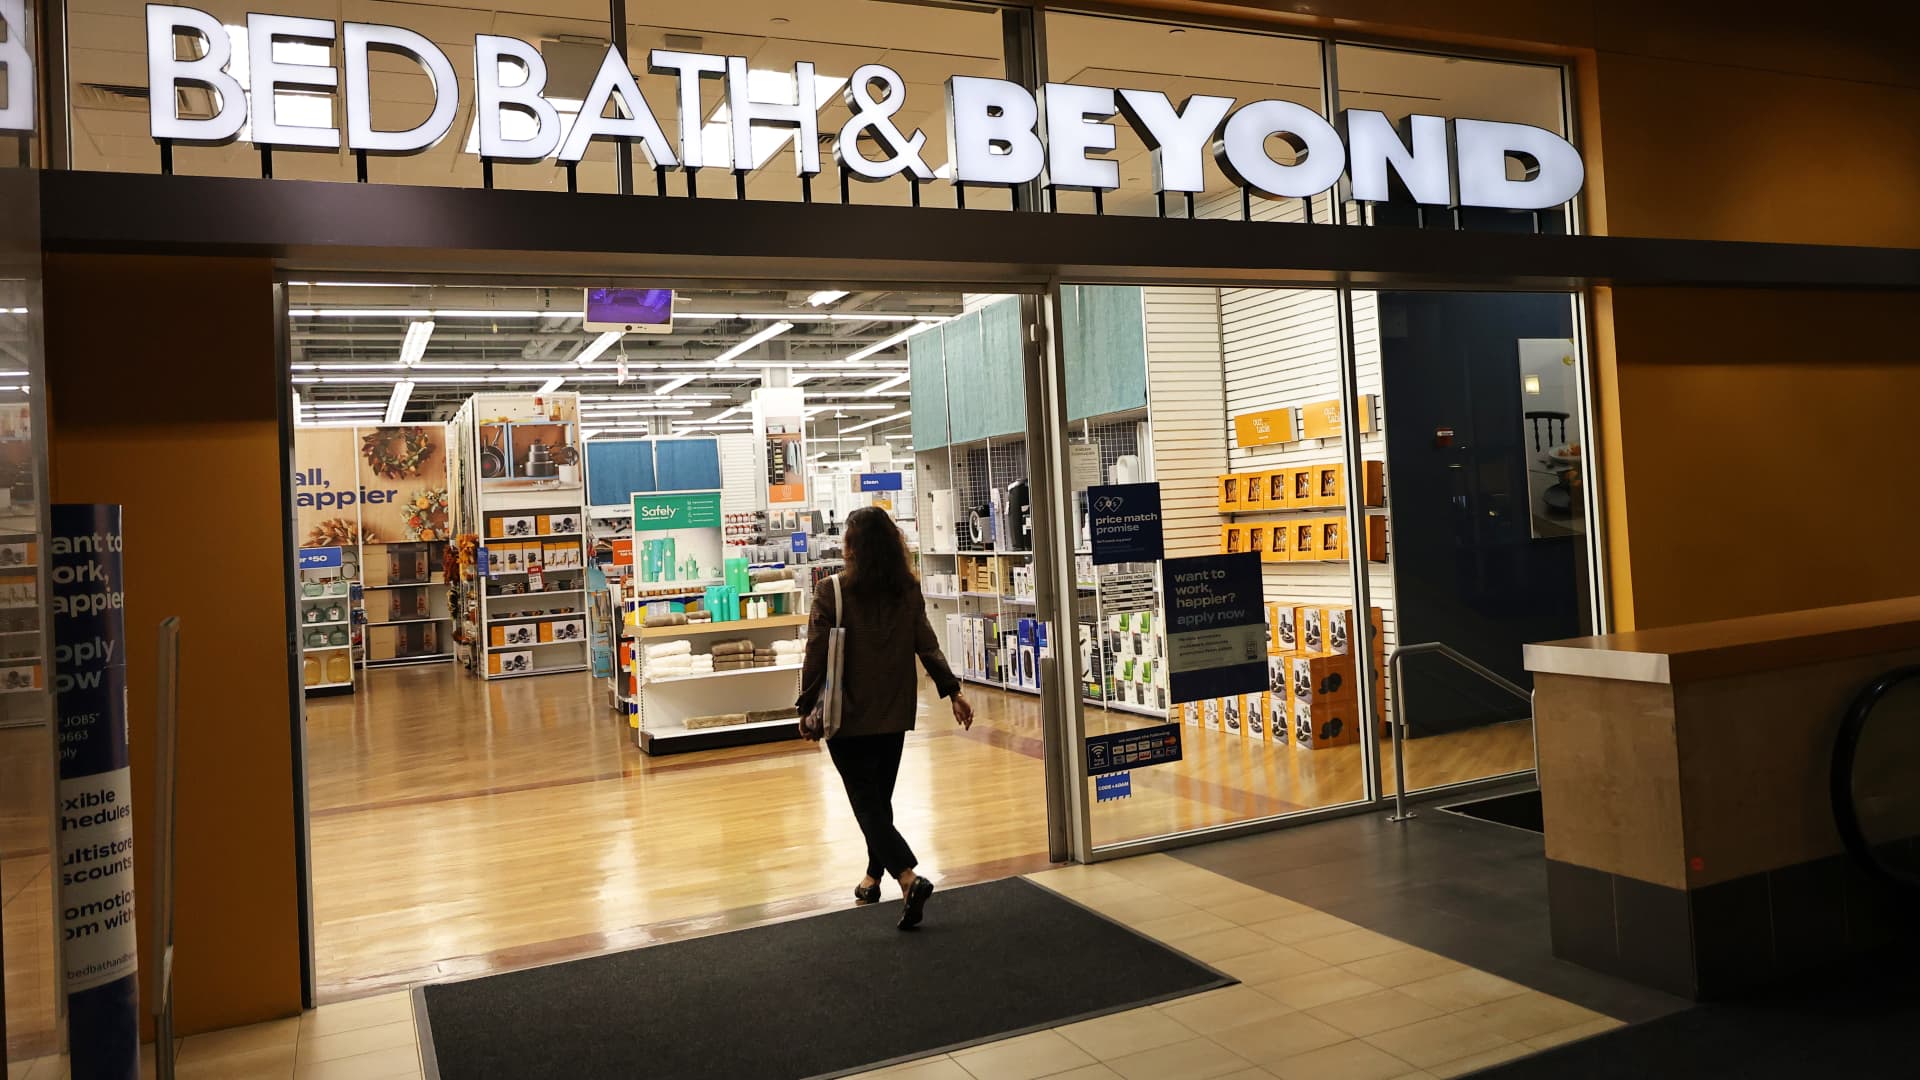 Bed Bath & Beyond reports 28% drop in sales as it presses ahead with turnaround plan – CNBC